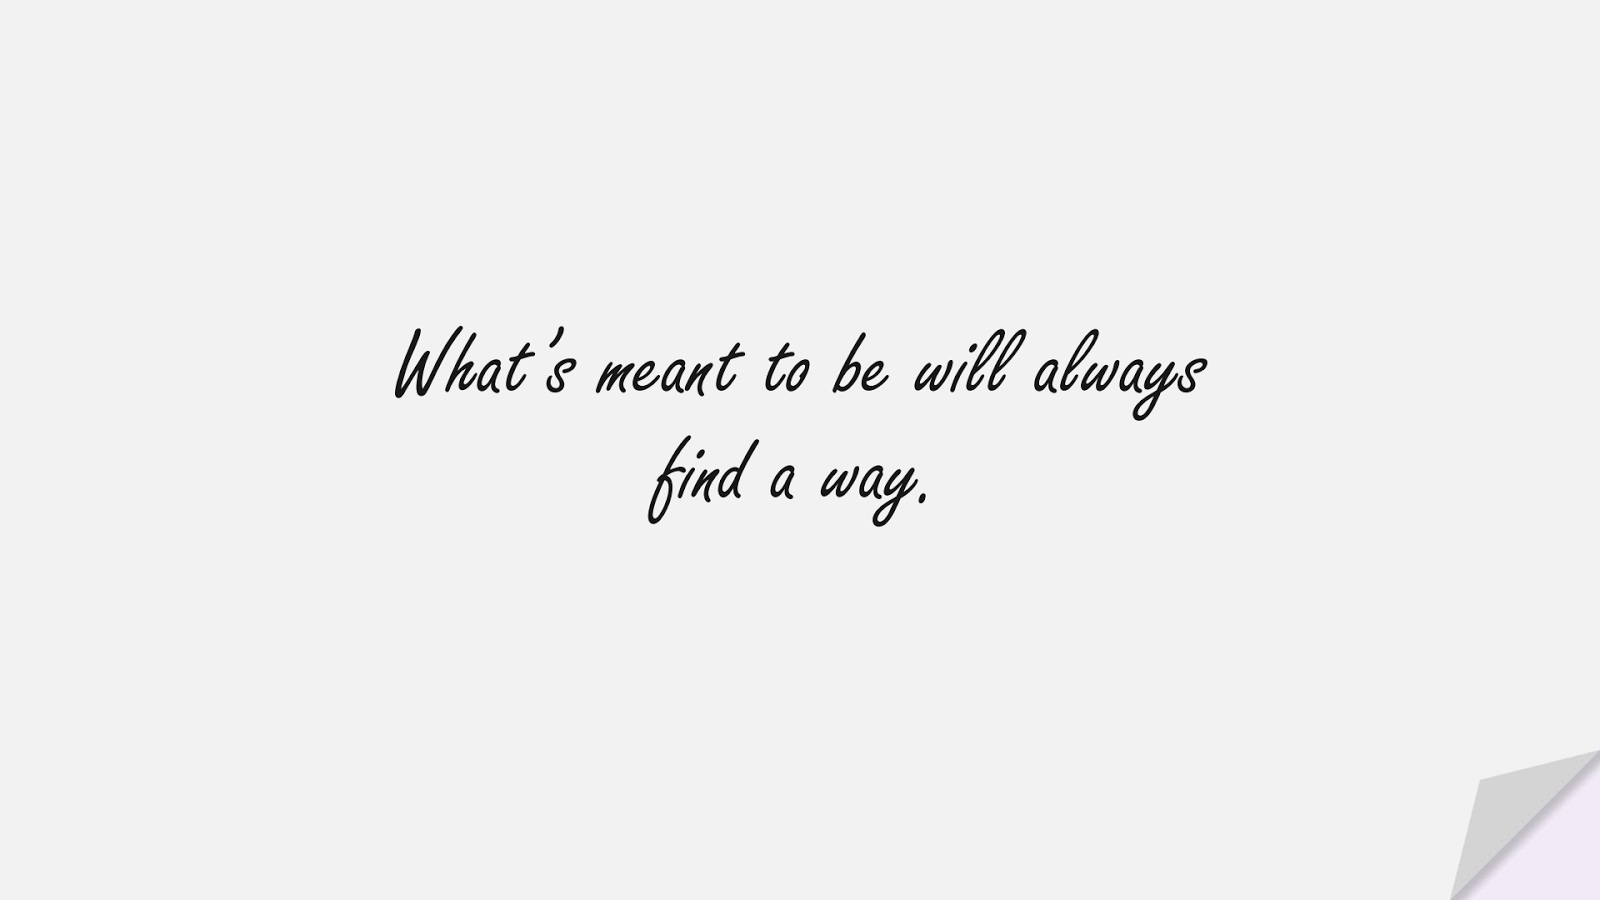 What’s meant to be will always find a way.FALSE